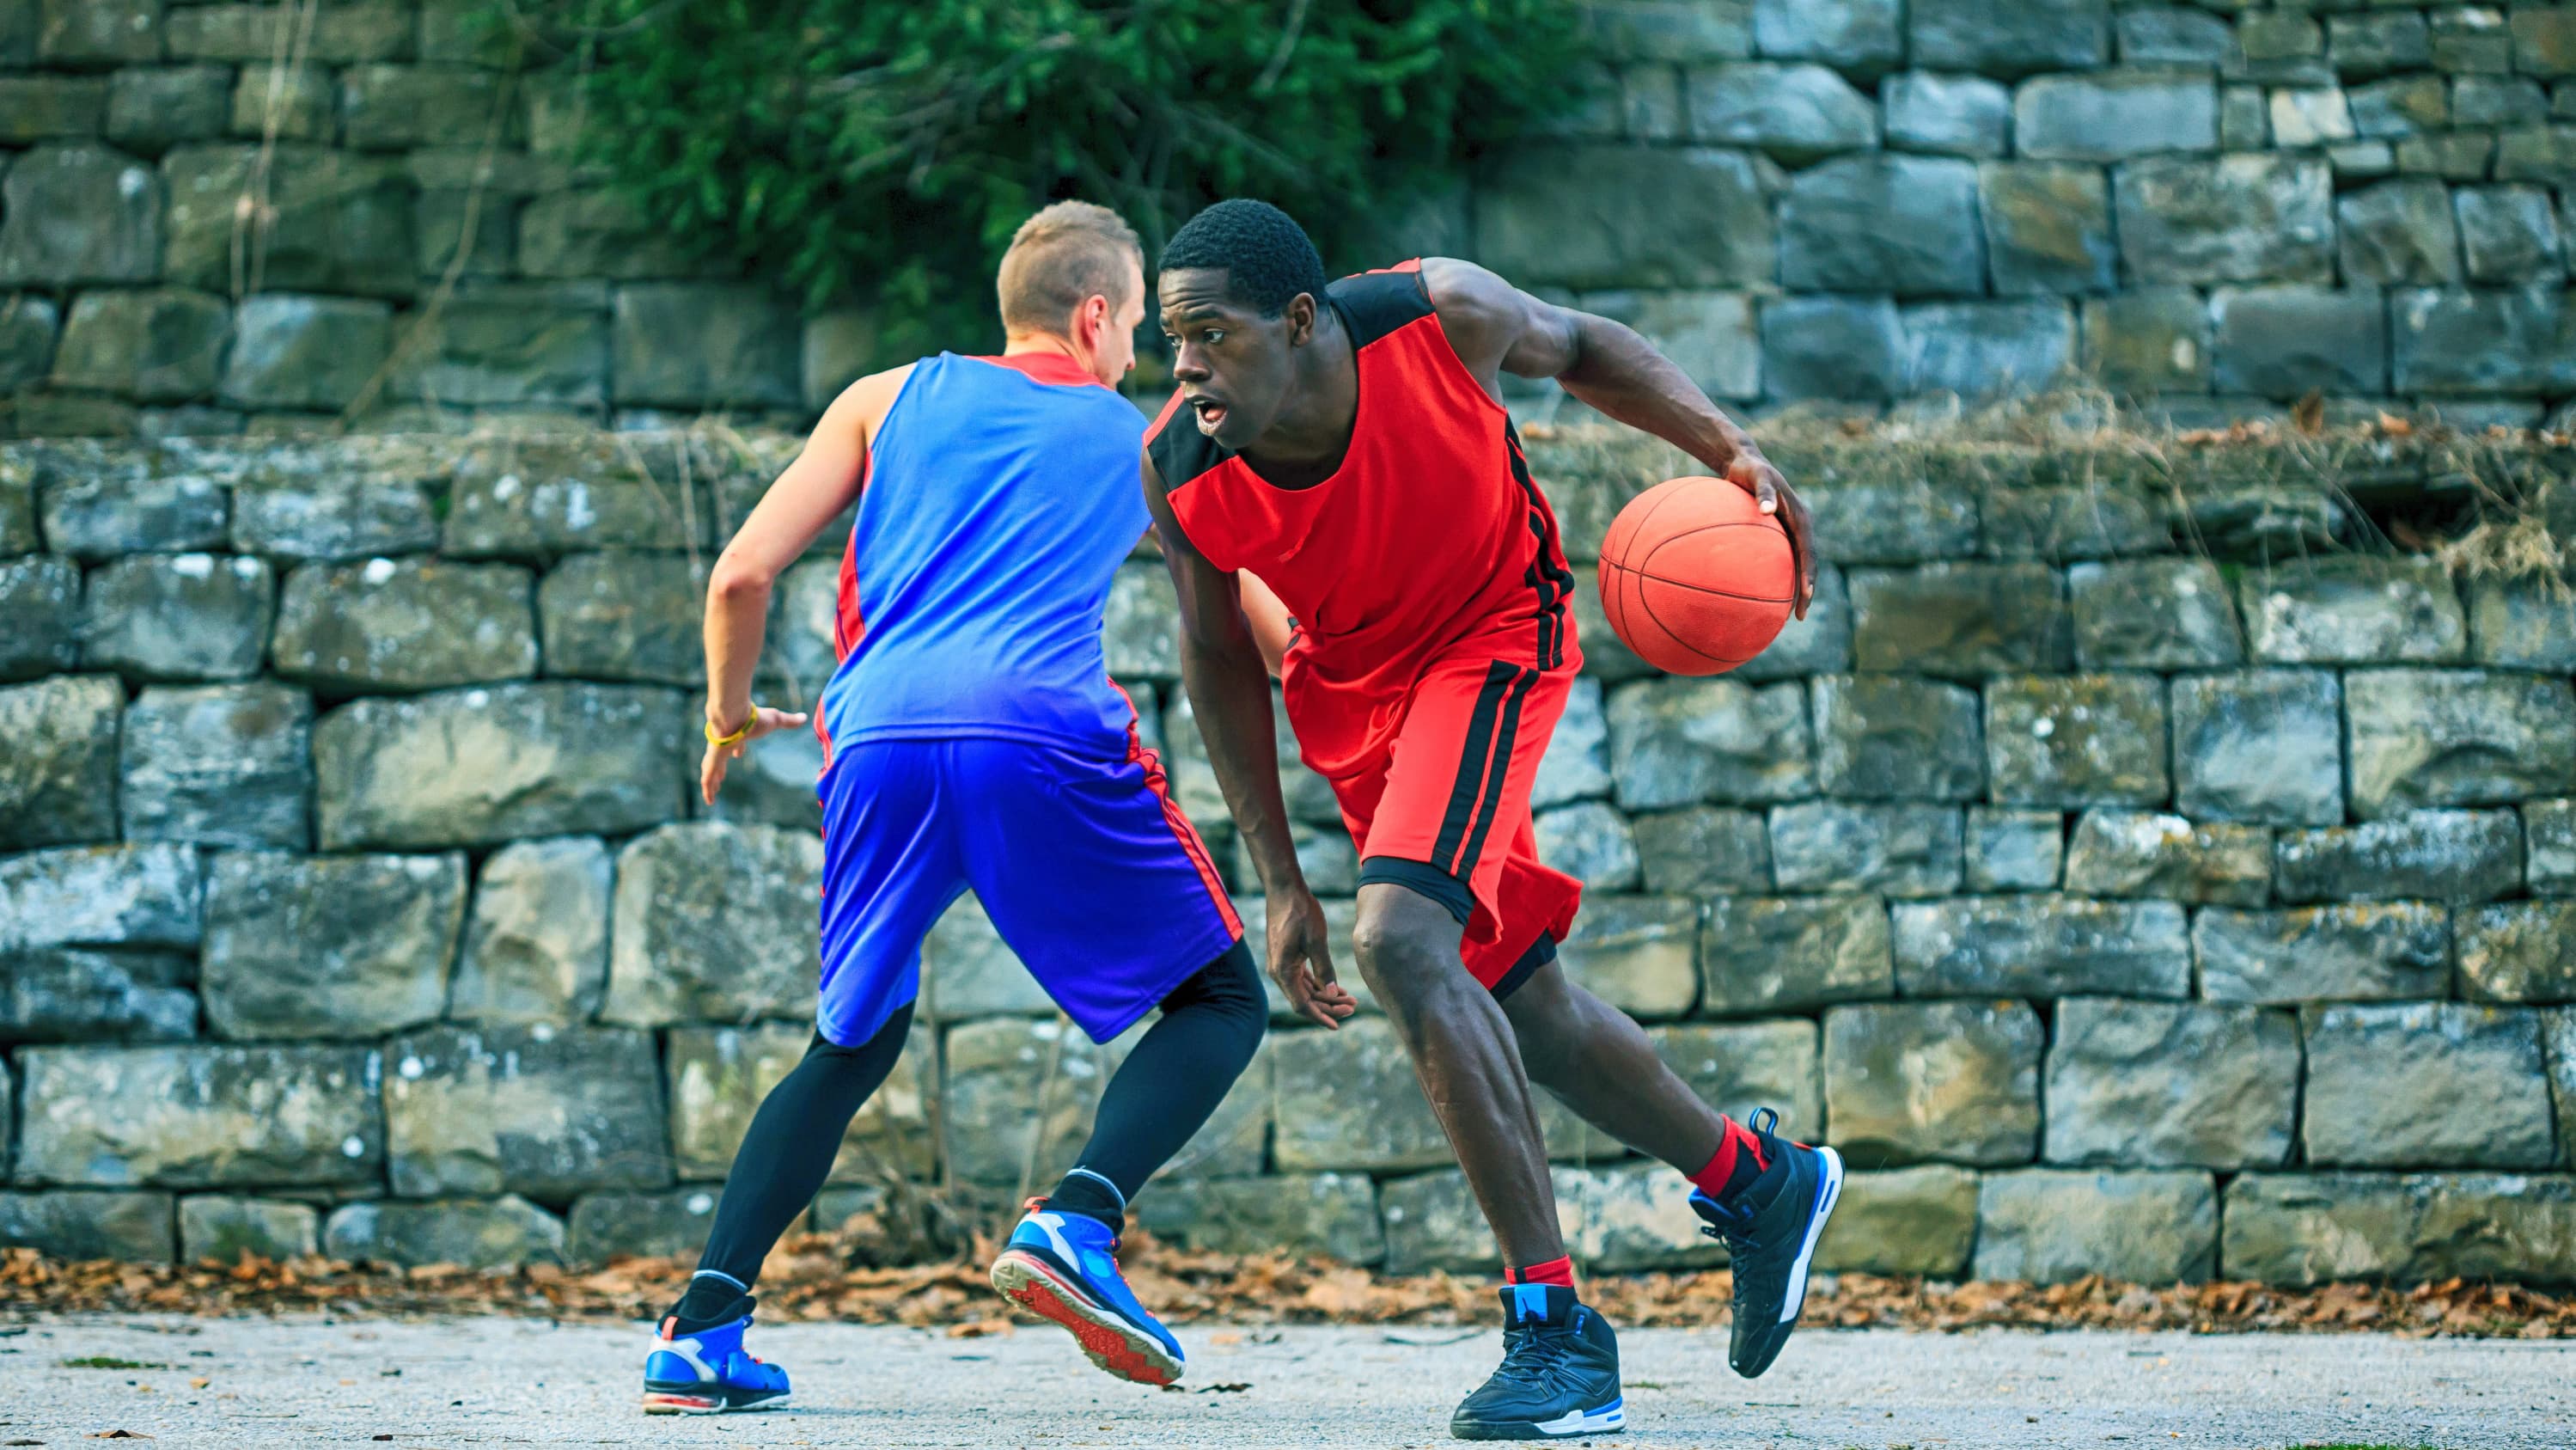 Two young people play basketball in a park.